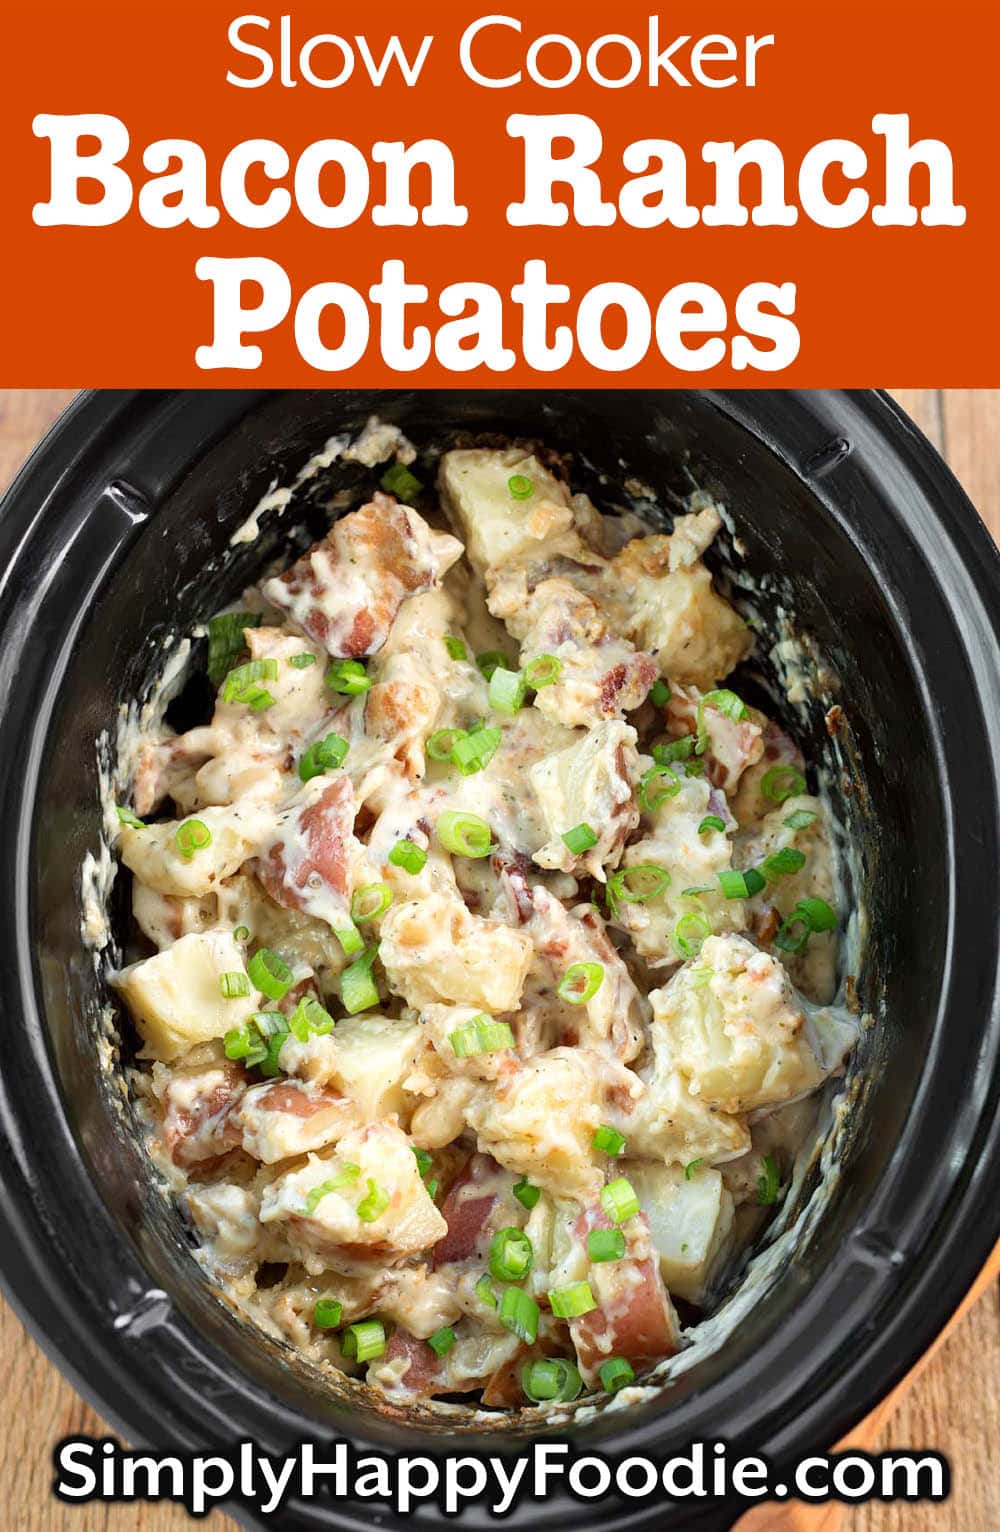 Slow Cooker Bacon Ranch Potatoes - Simply Happy Foodie